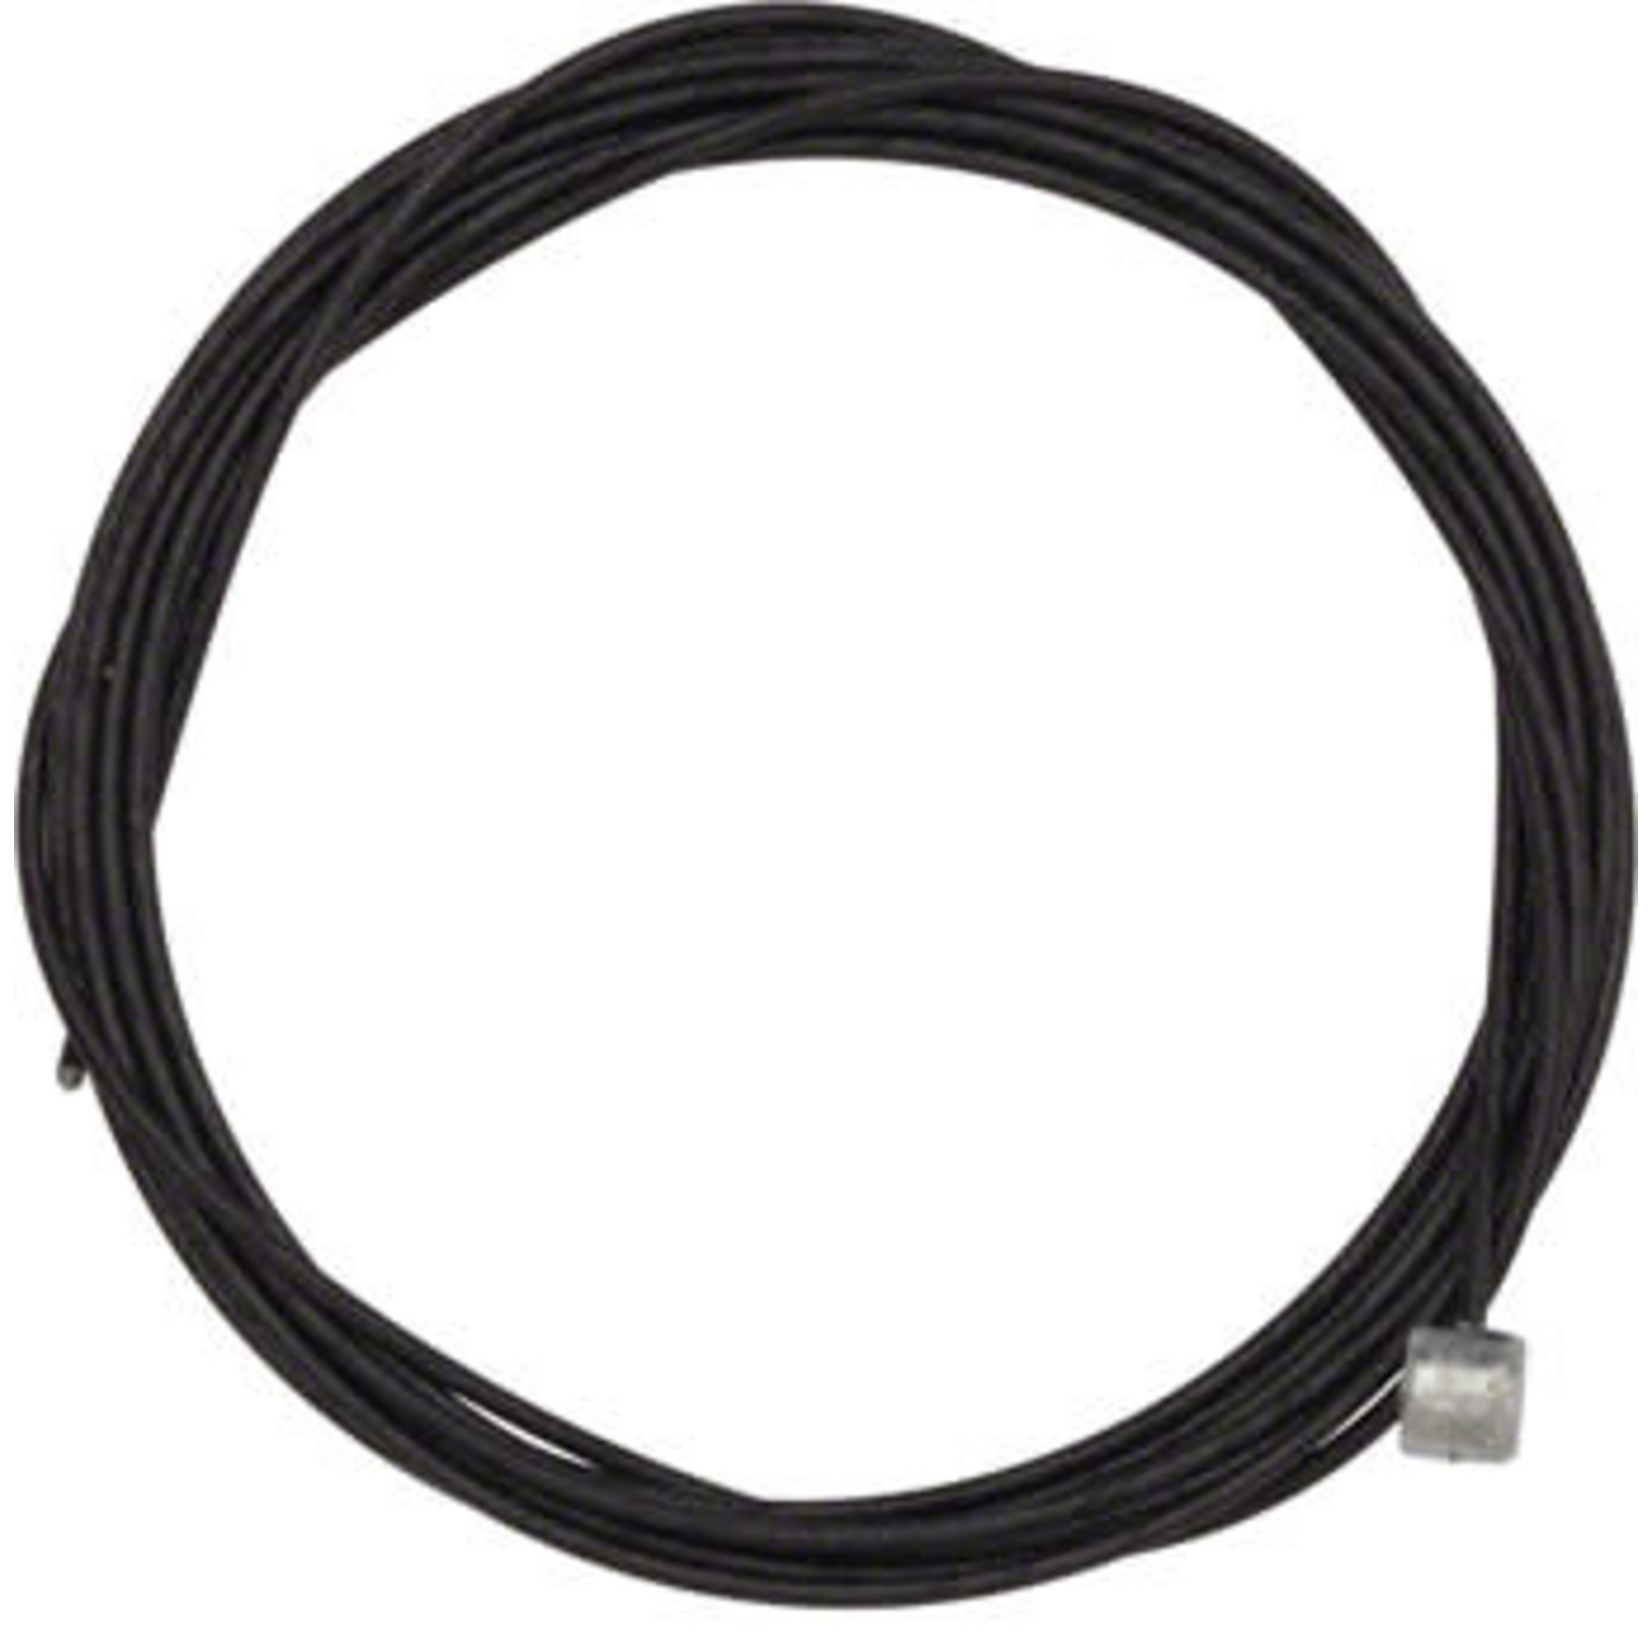 Sram SlickWire Brake Cable - MTB, 1.6mm, PTFE Coated, 2350mm Length, Single